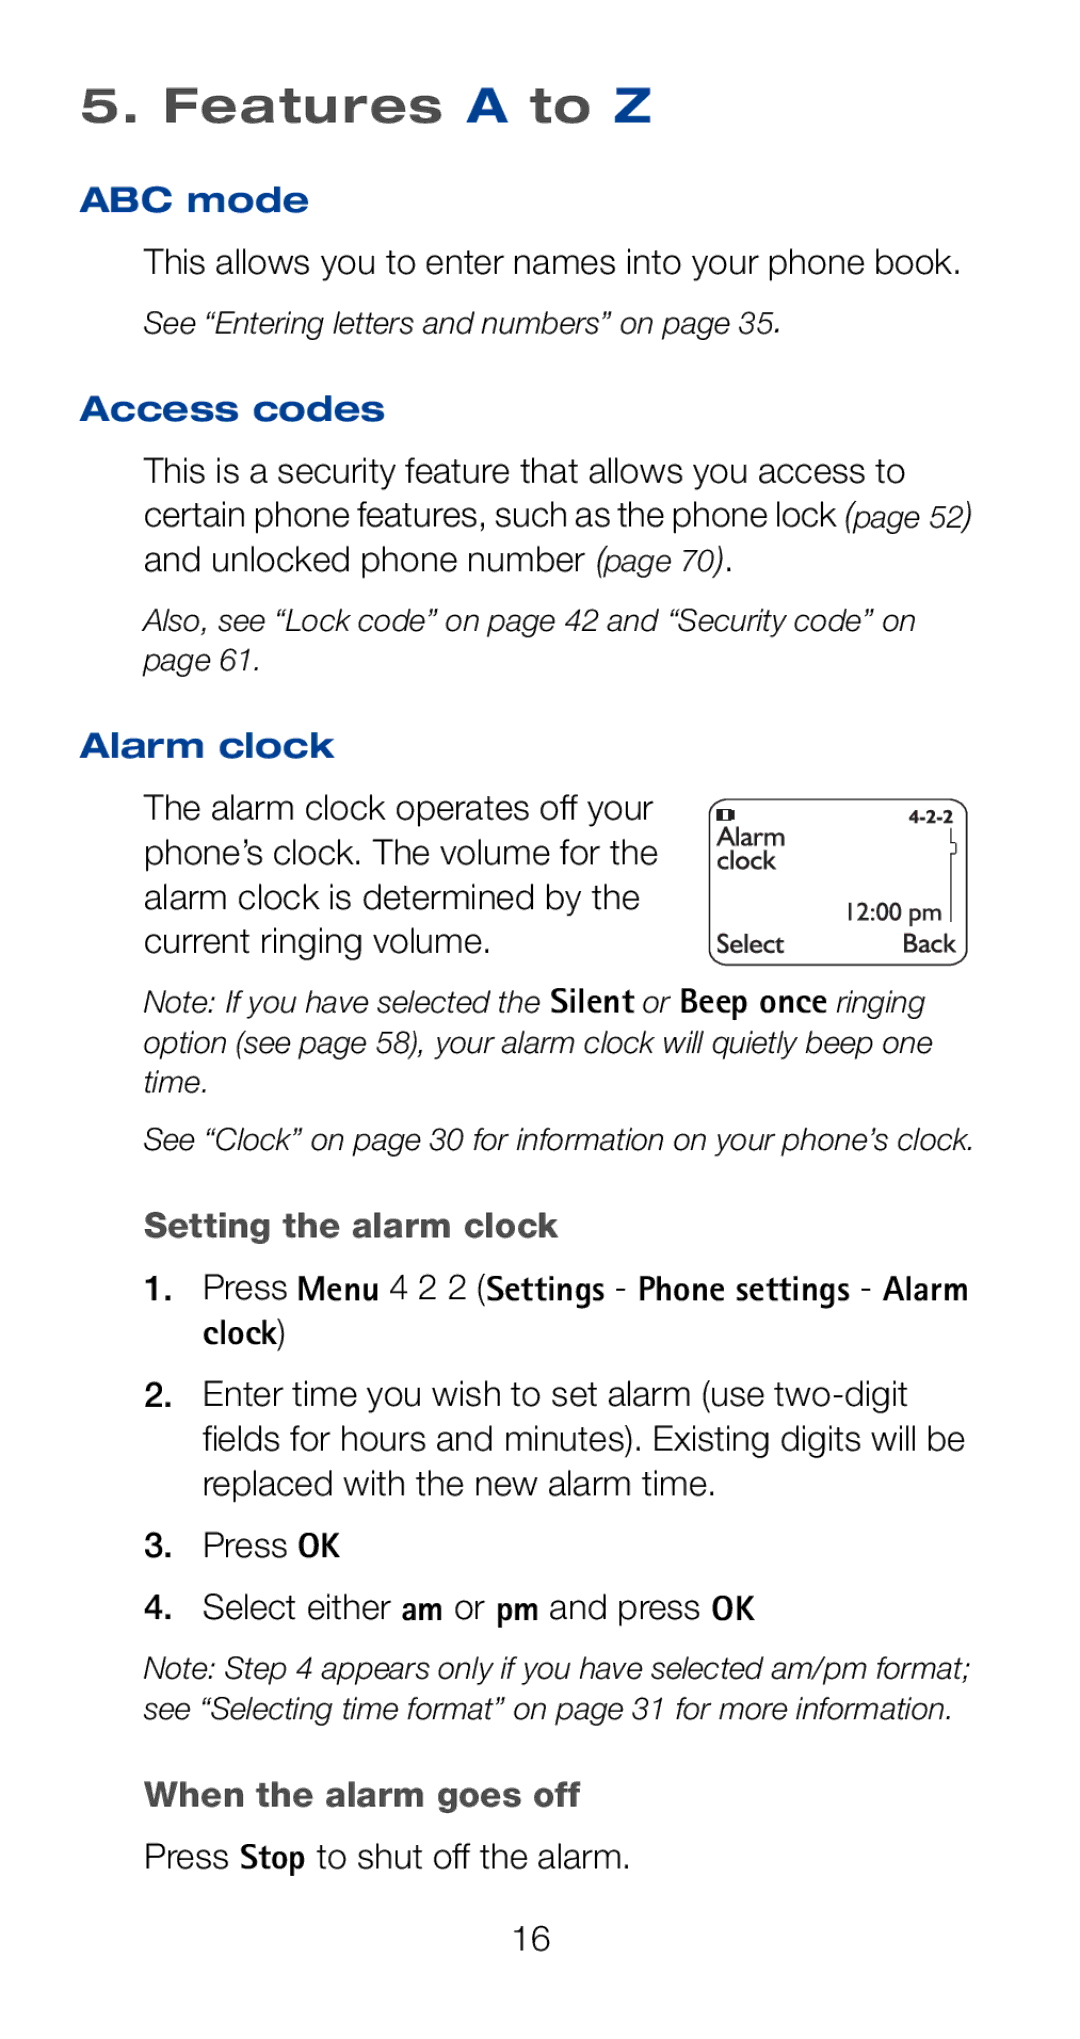 Nokia 6161i owner manual Features a to Z, Setting the alarm clock, When the alarm goes off 